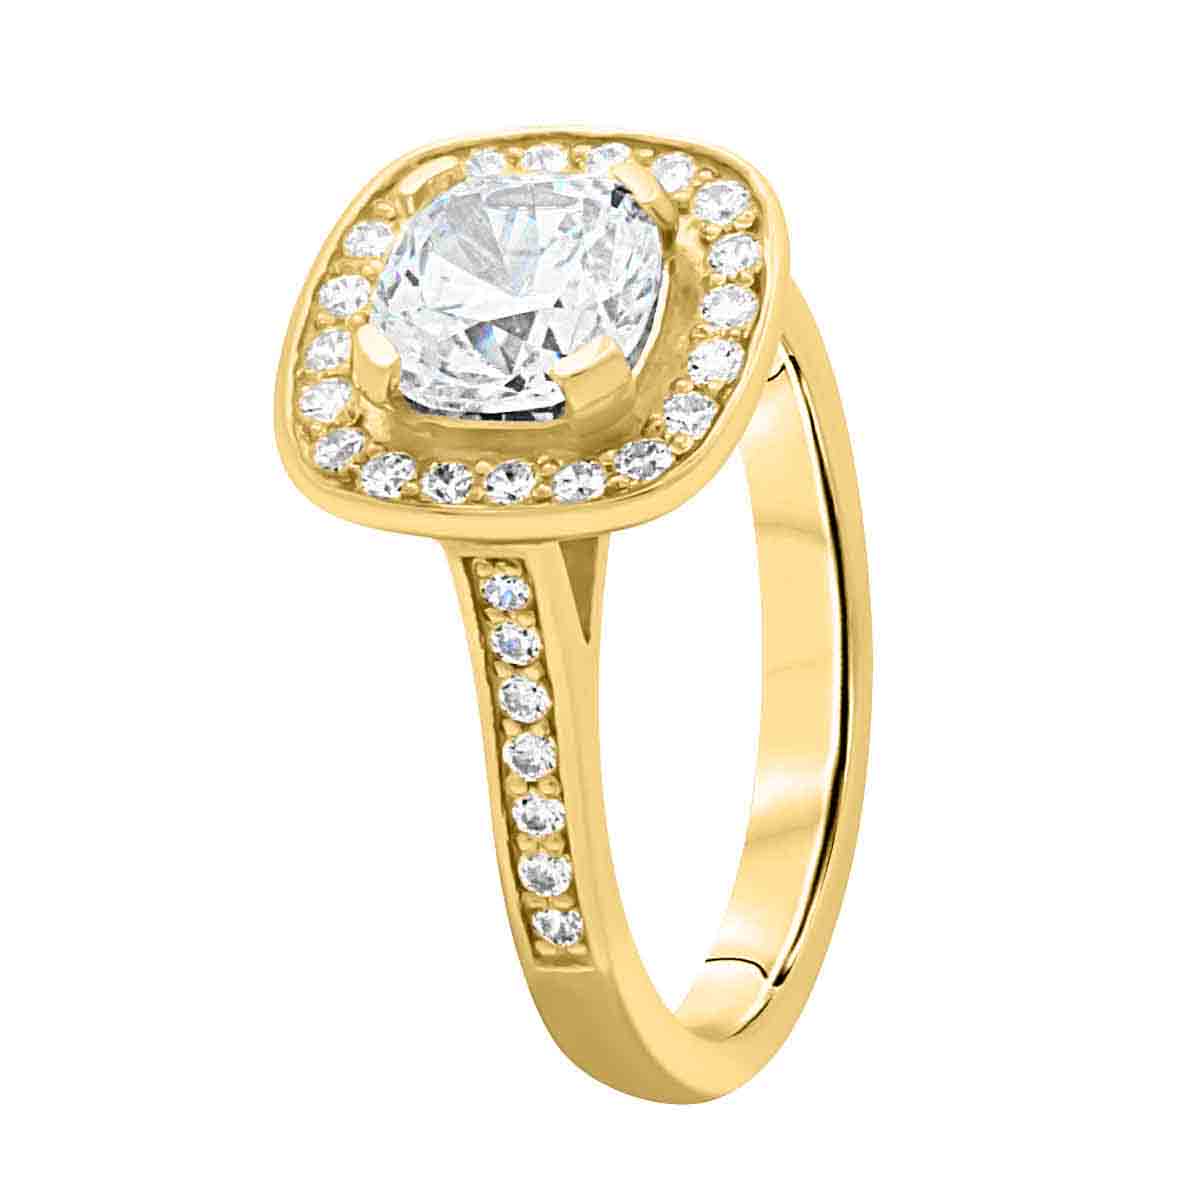 Cushion Cut Diamond Antique Diamond Ring in yellow gold in angled position